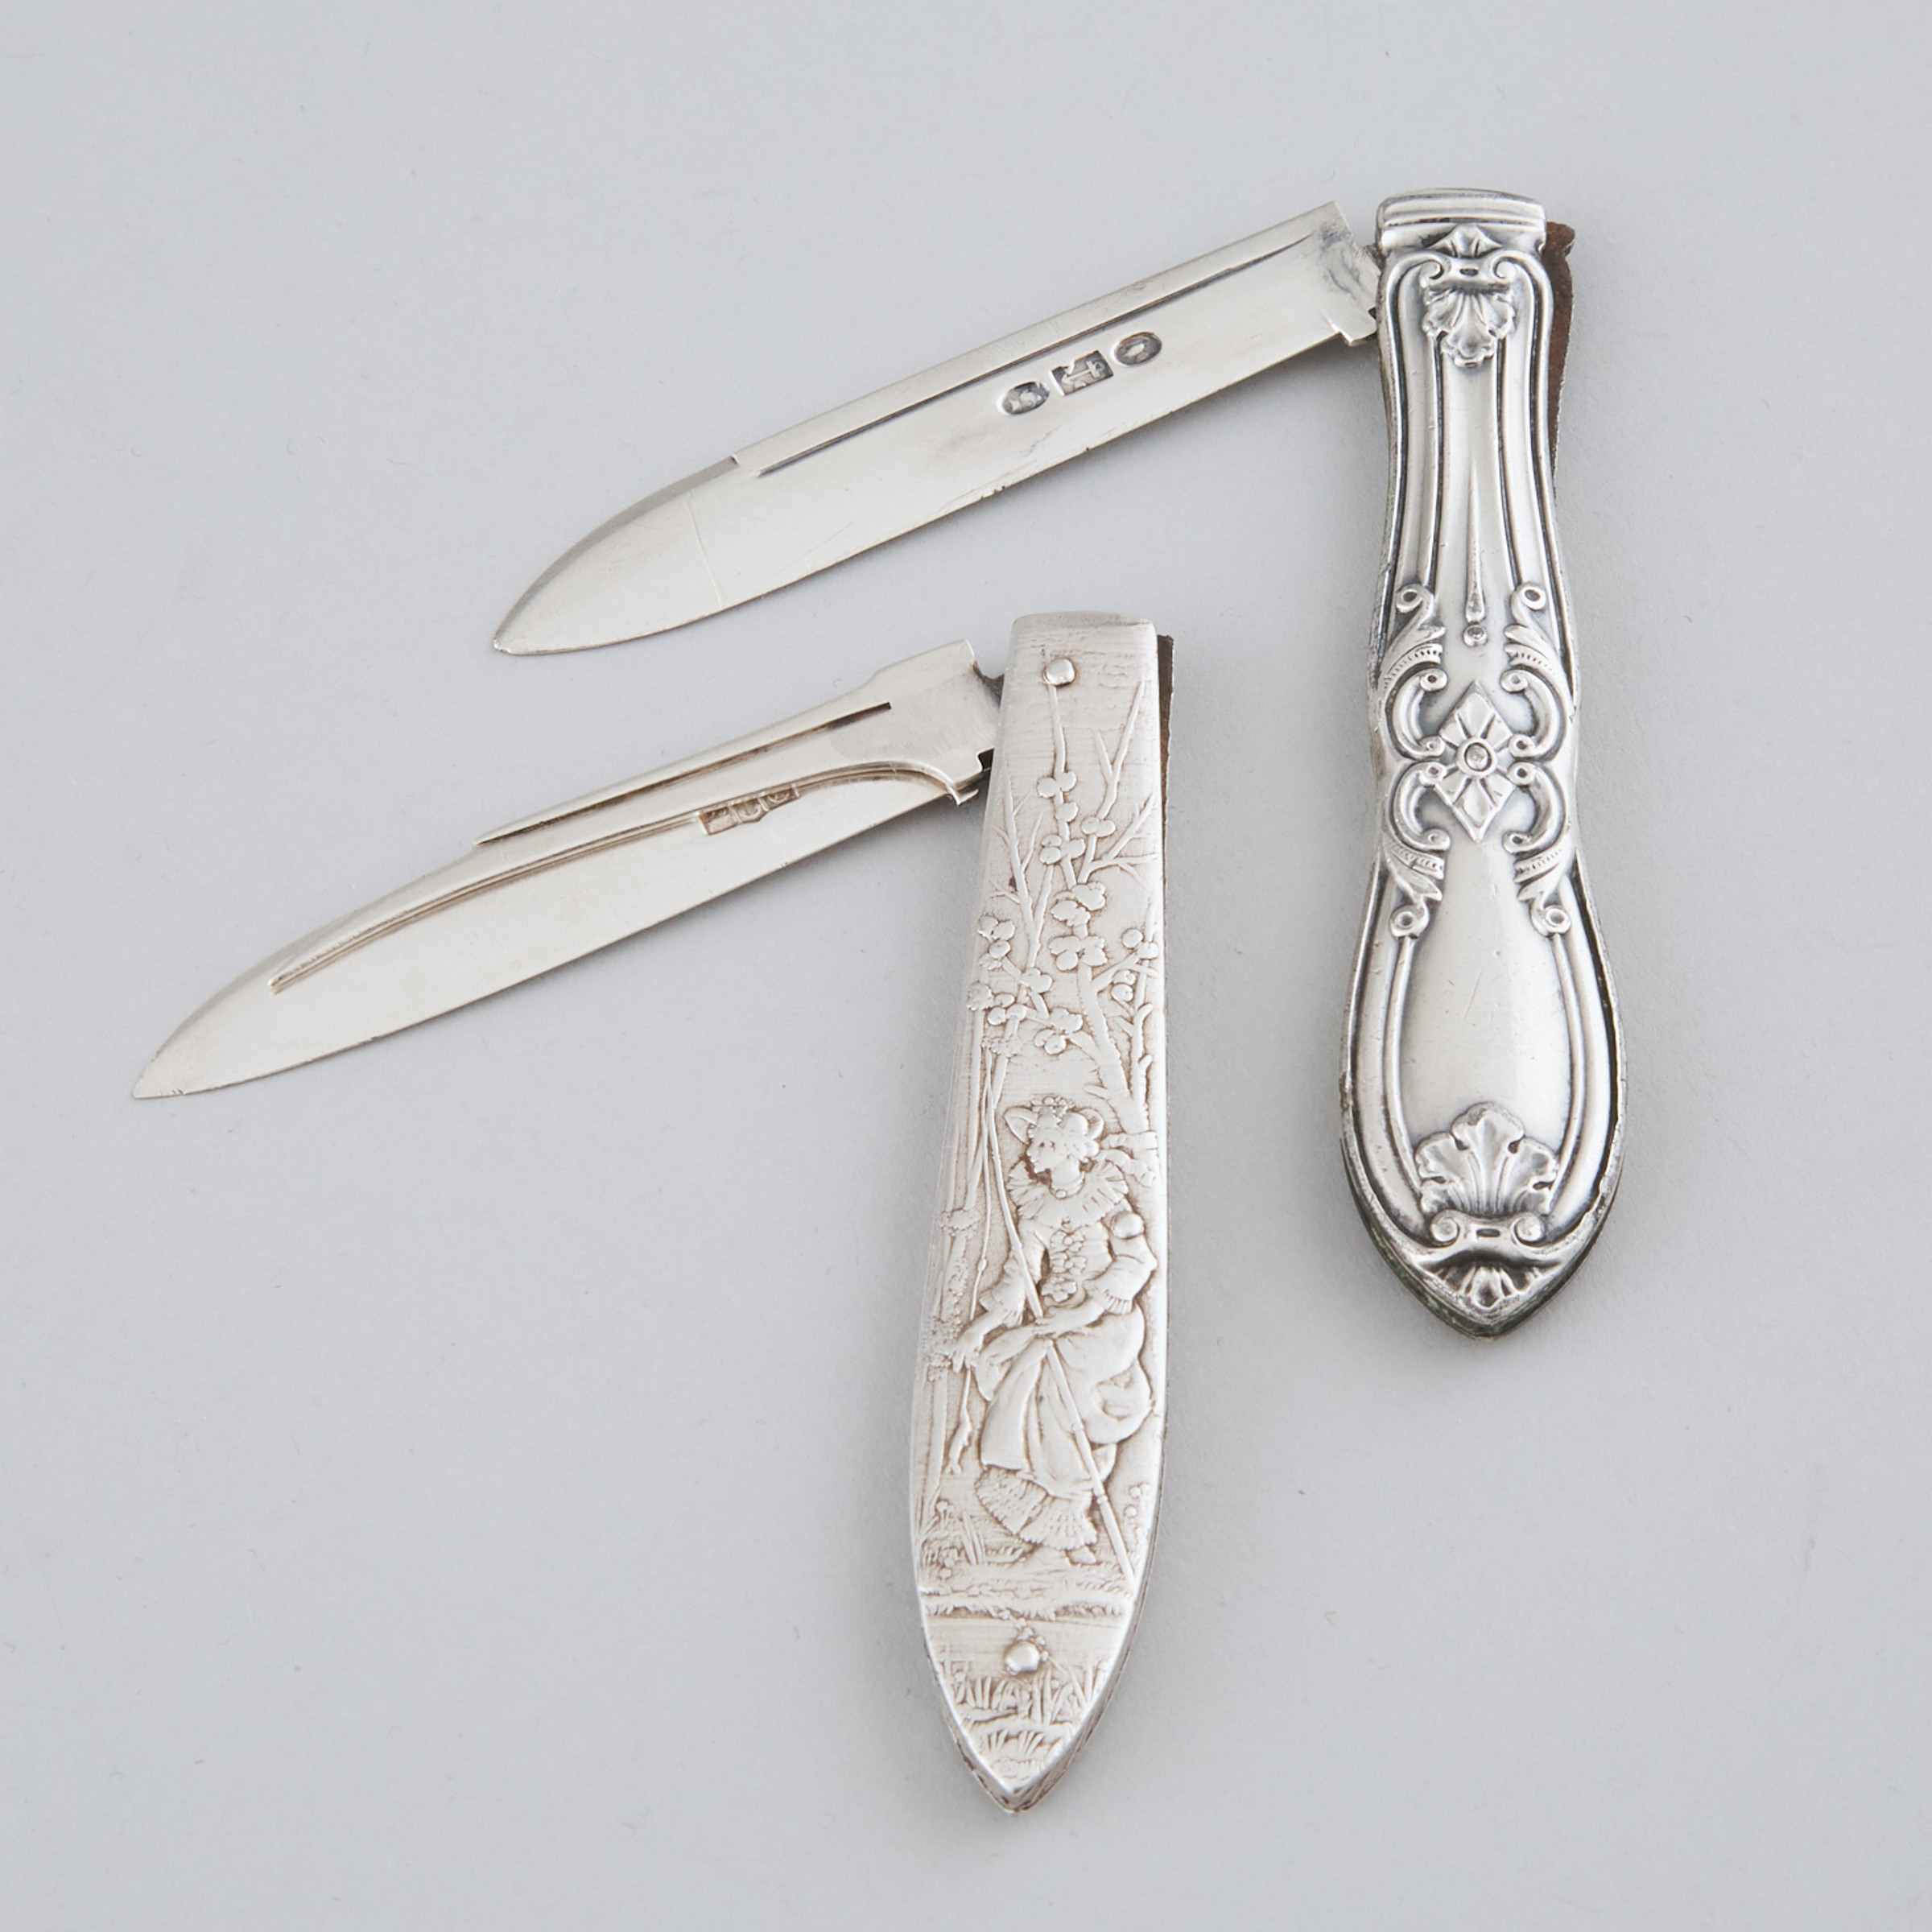 Two American Silver Pocket Knives  2f2517